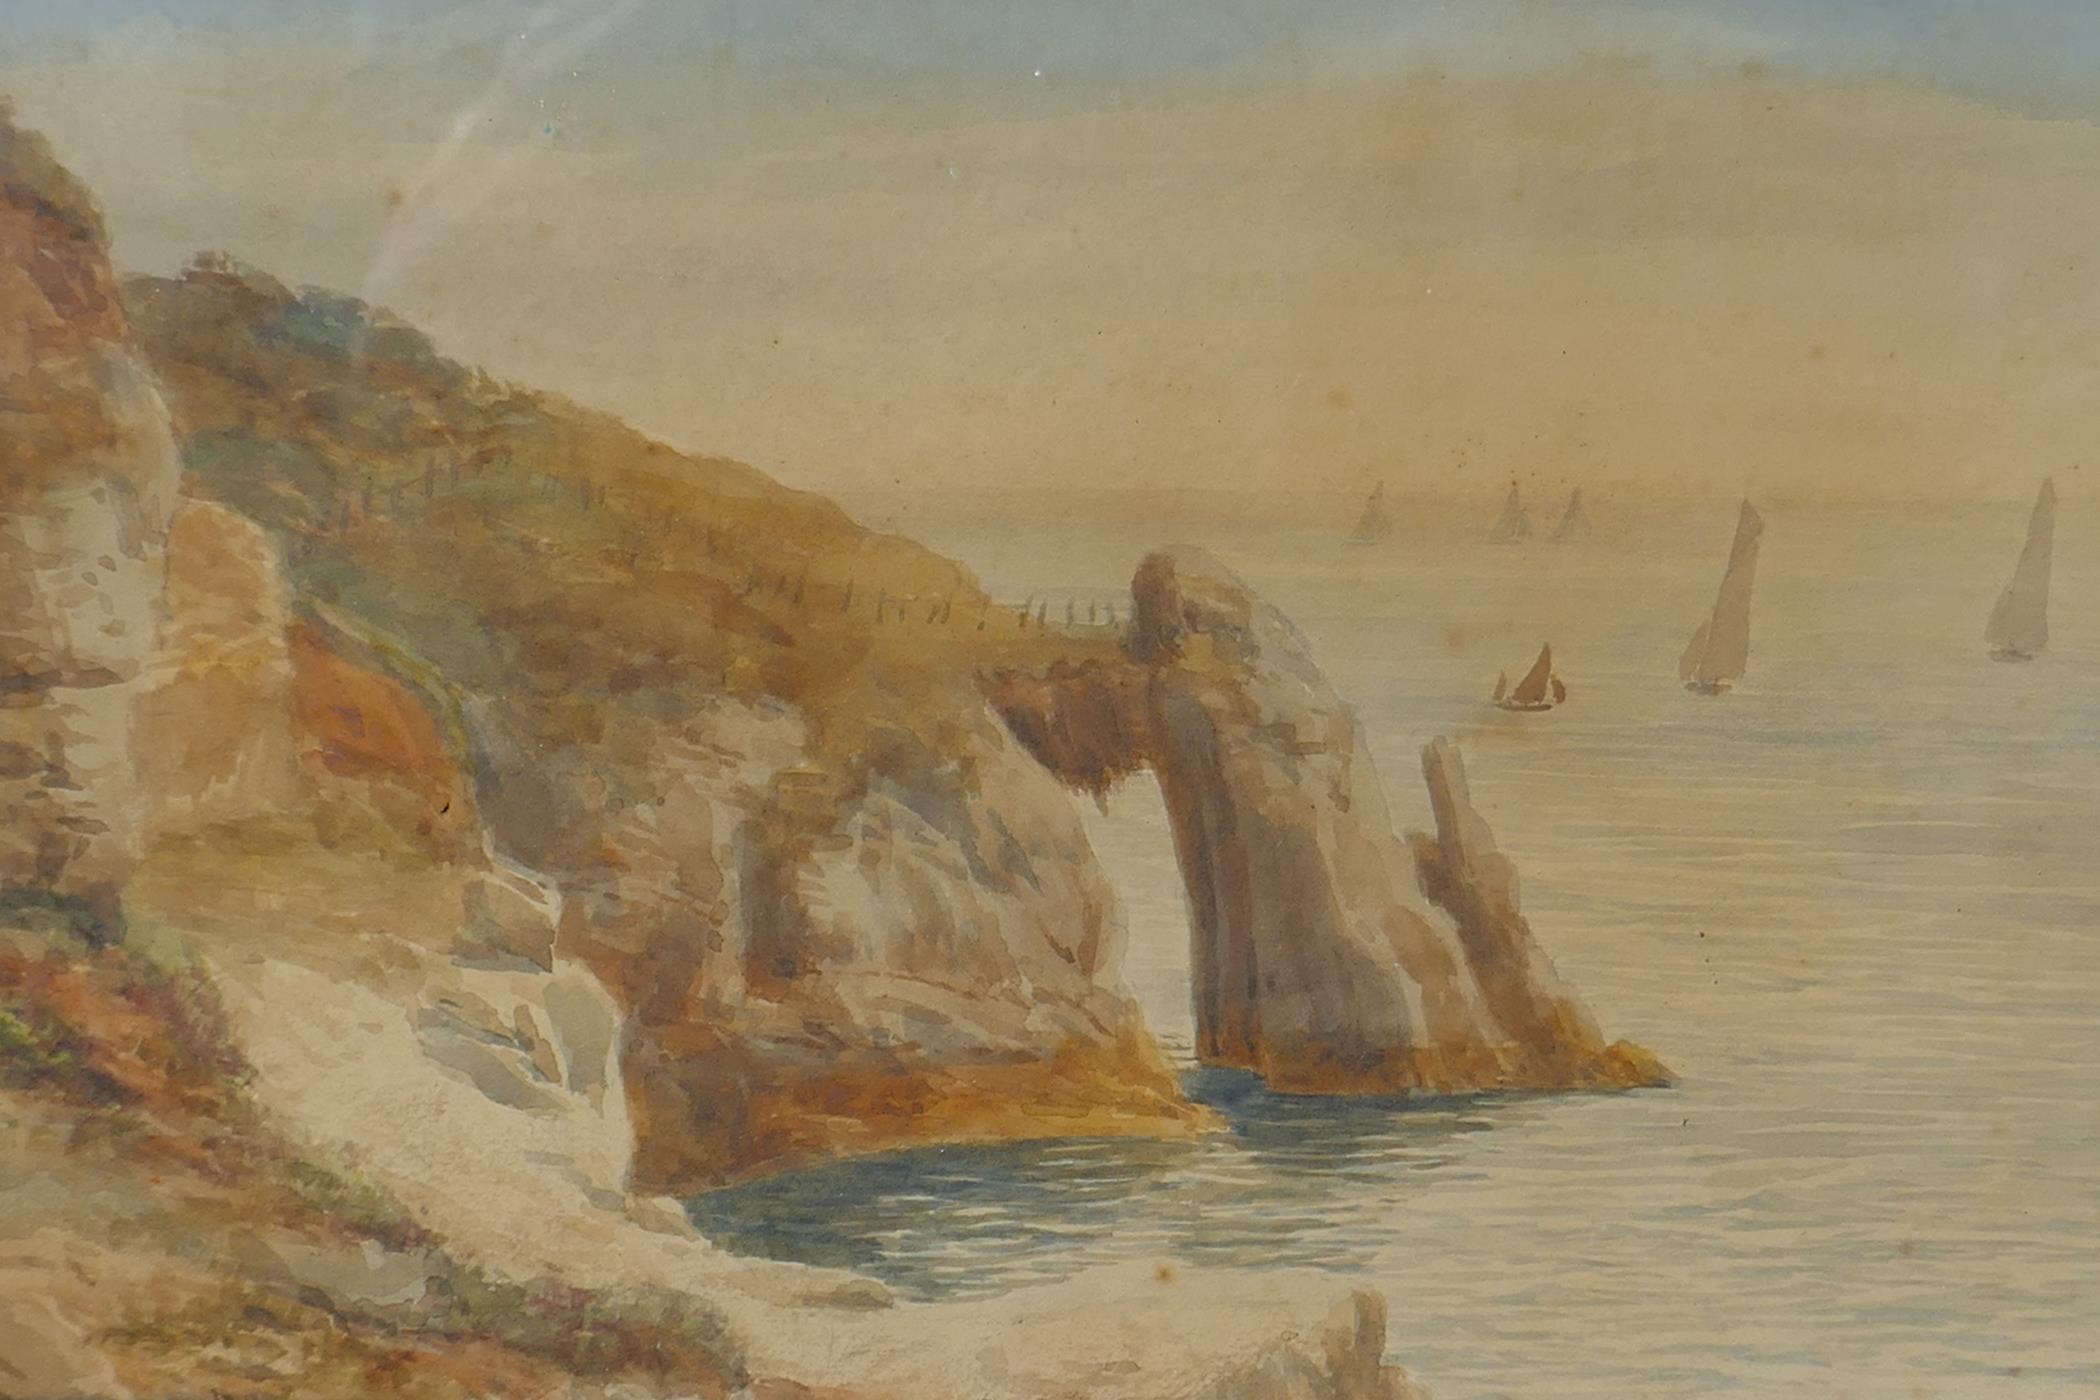 Coastal scene, monogramed indistinctly, C19th watercolour, and a courtyard scene with figure and - Image 2 of 4